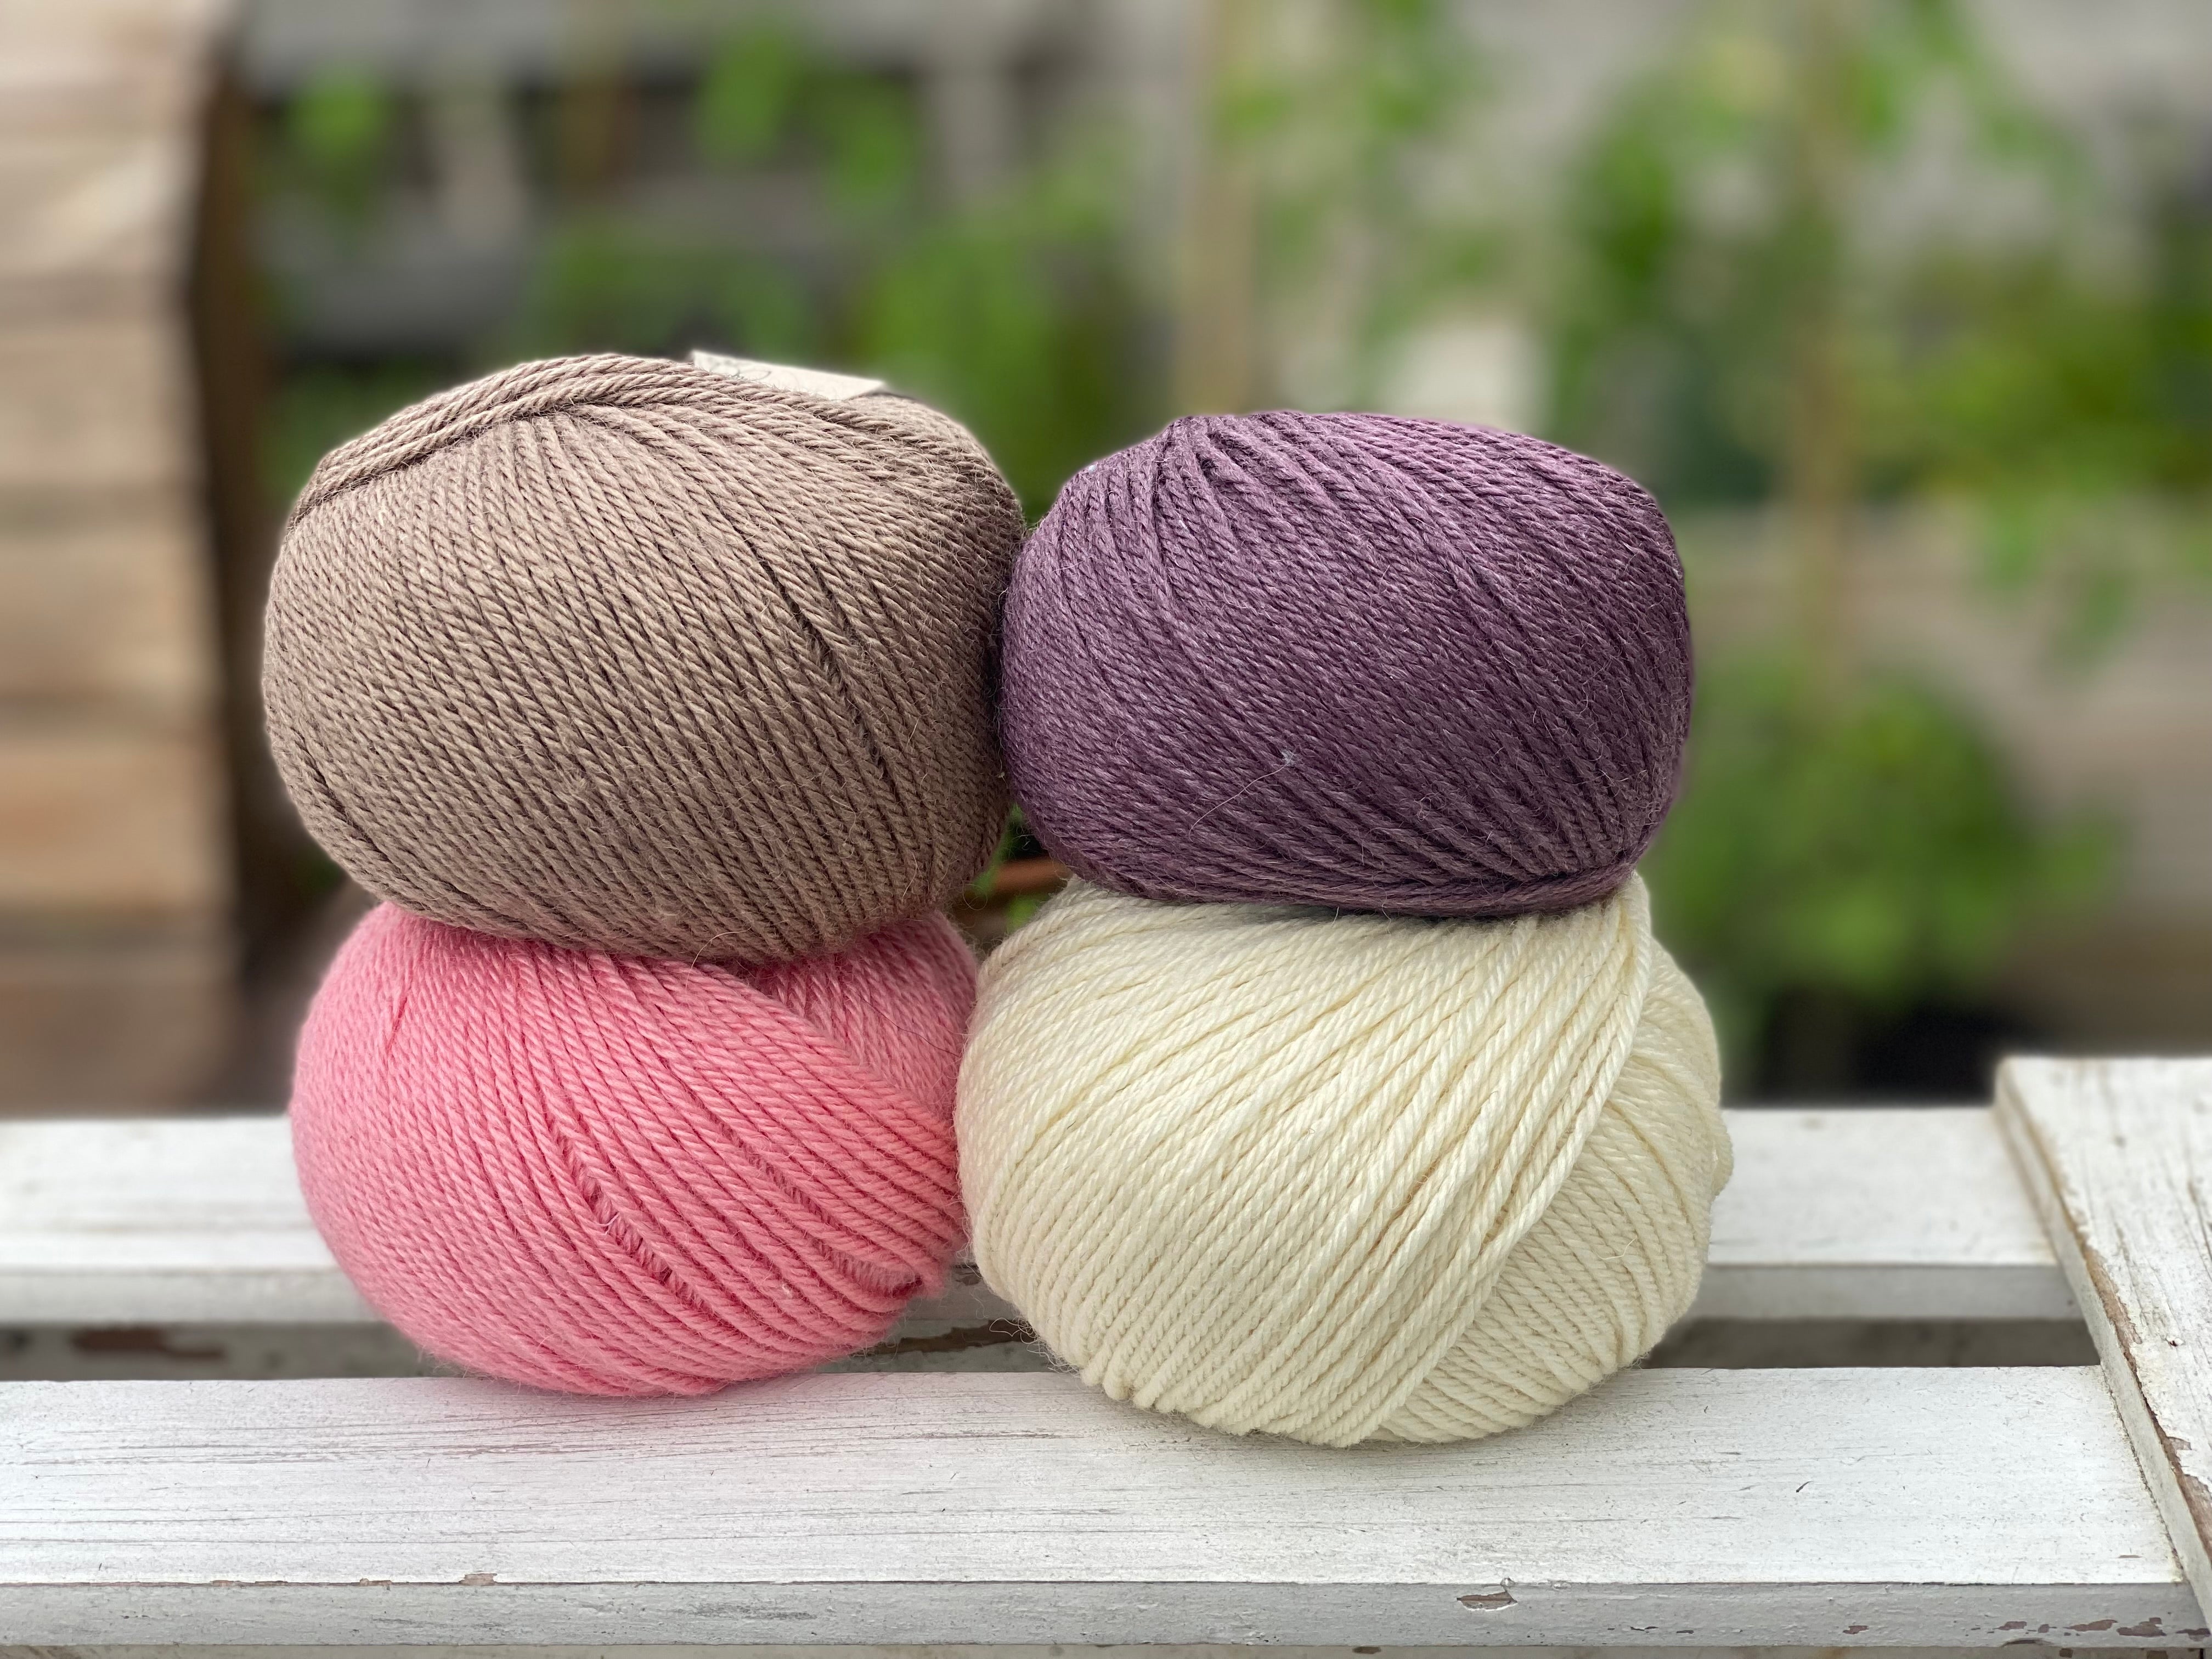 Four balls of yarn in two rows of two. There is a brown ball, a dark purple ball, a pink ball and a cream ball.